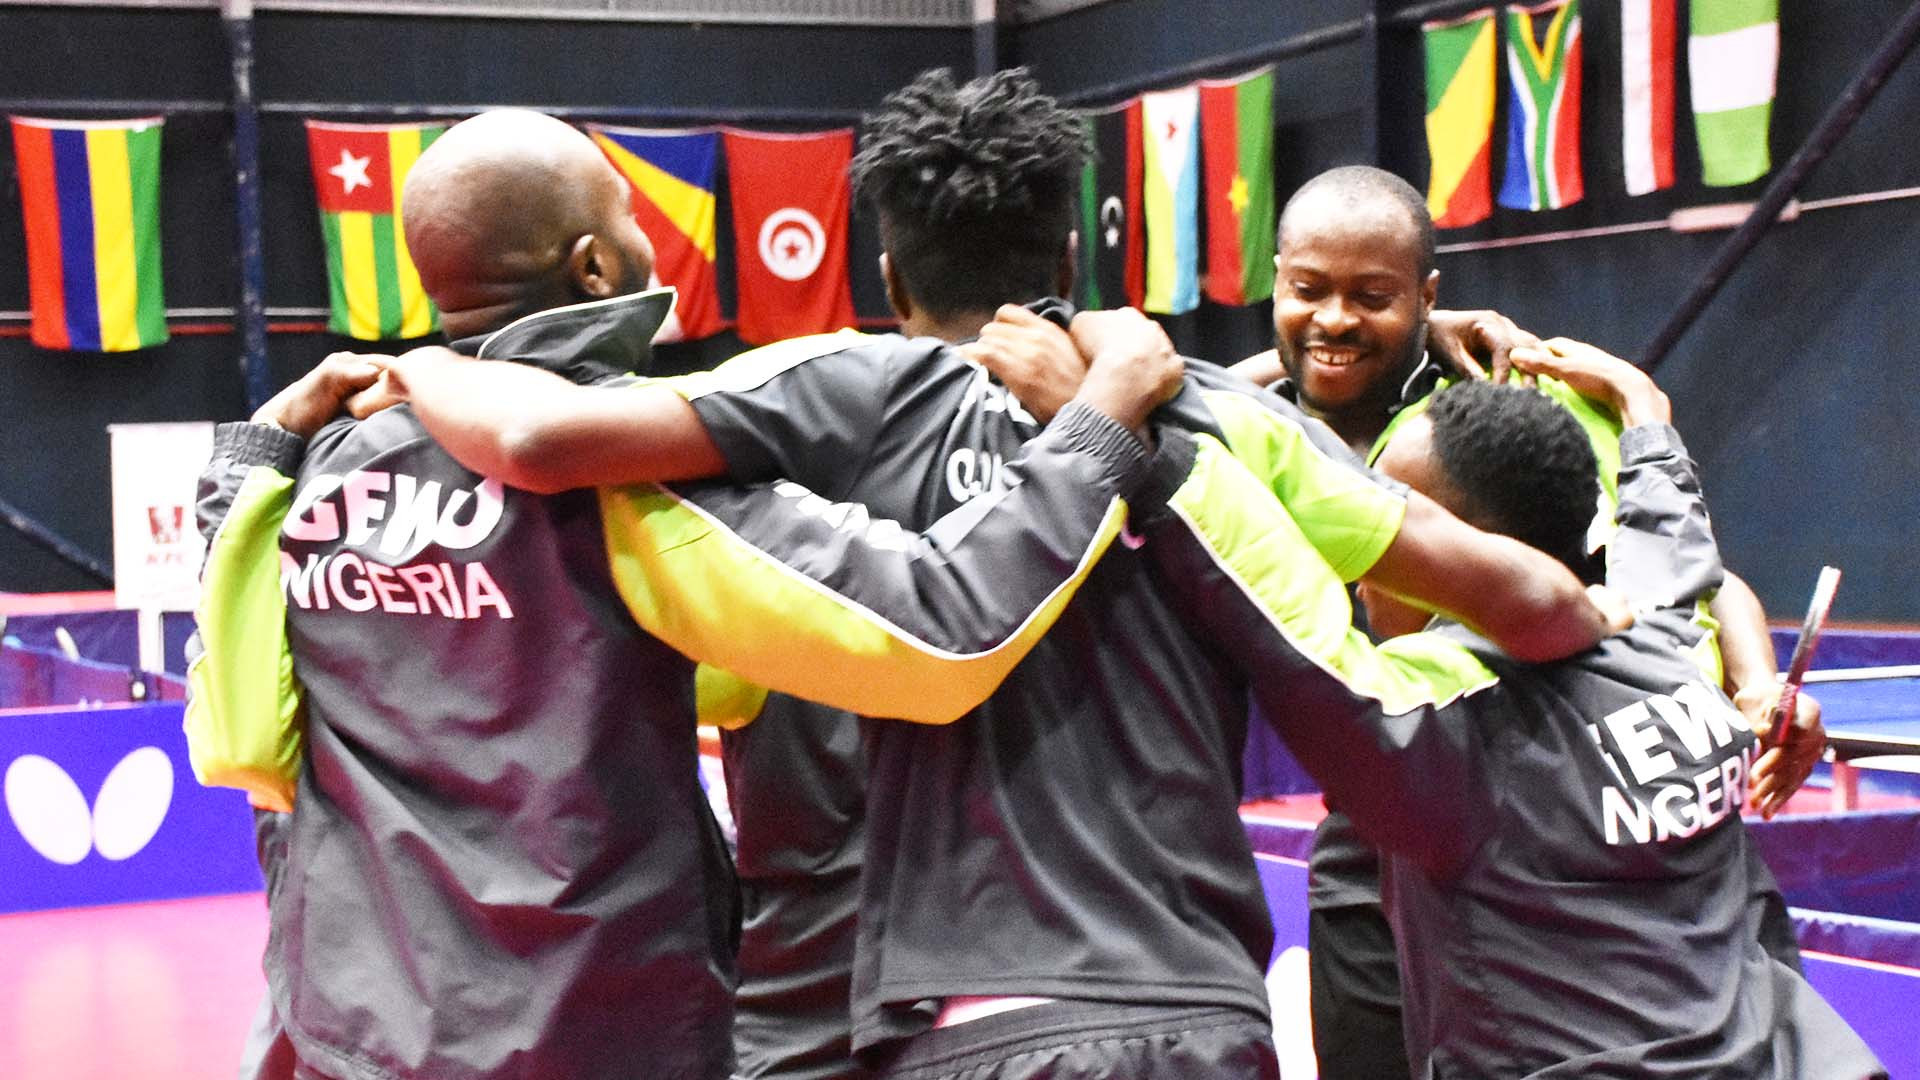 Nigeria and Egypt earn team titles at African Table Tennis Championships in Mauritius